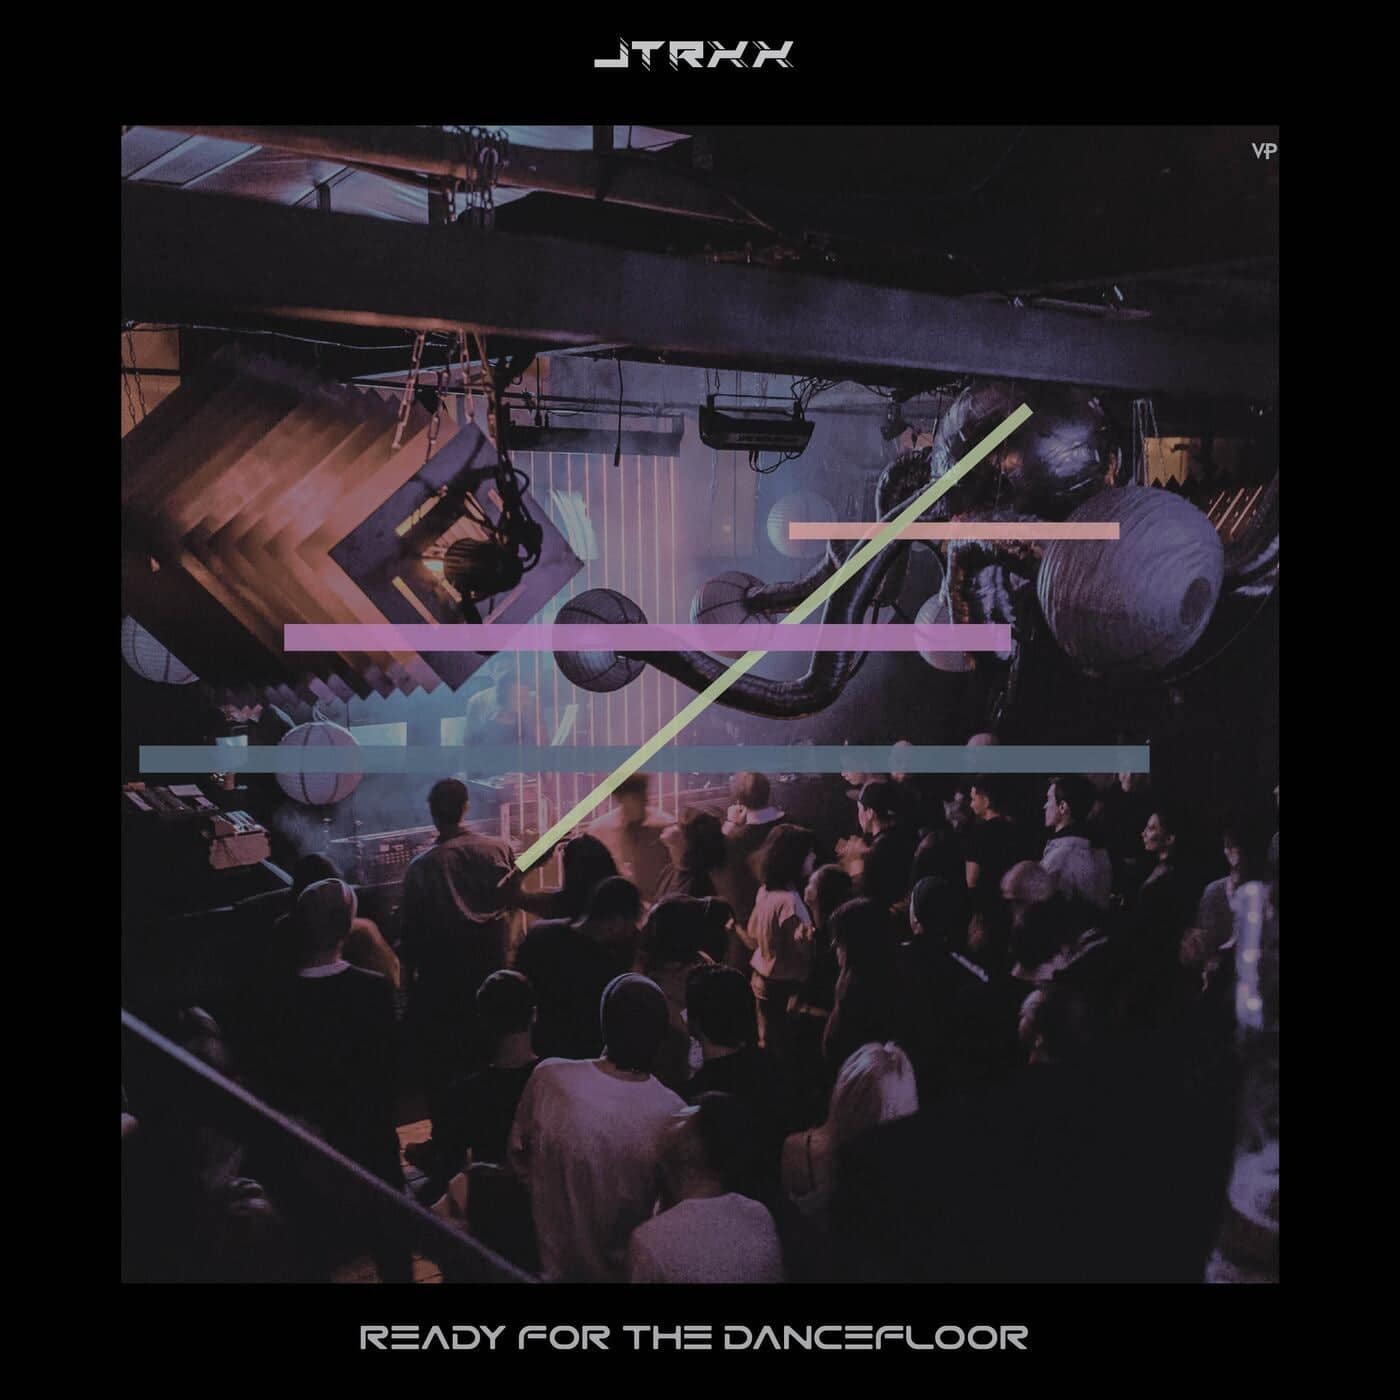 Download JTRXX - Ready for the Dancefloor on Electrobuzz